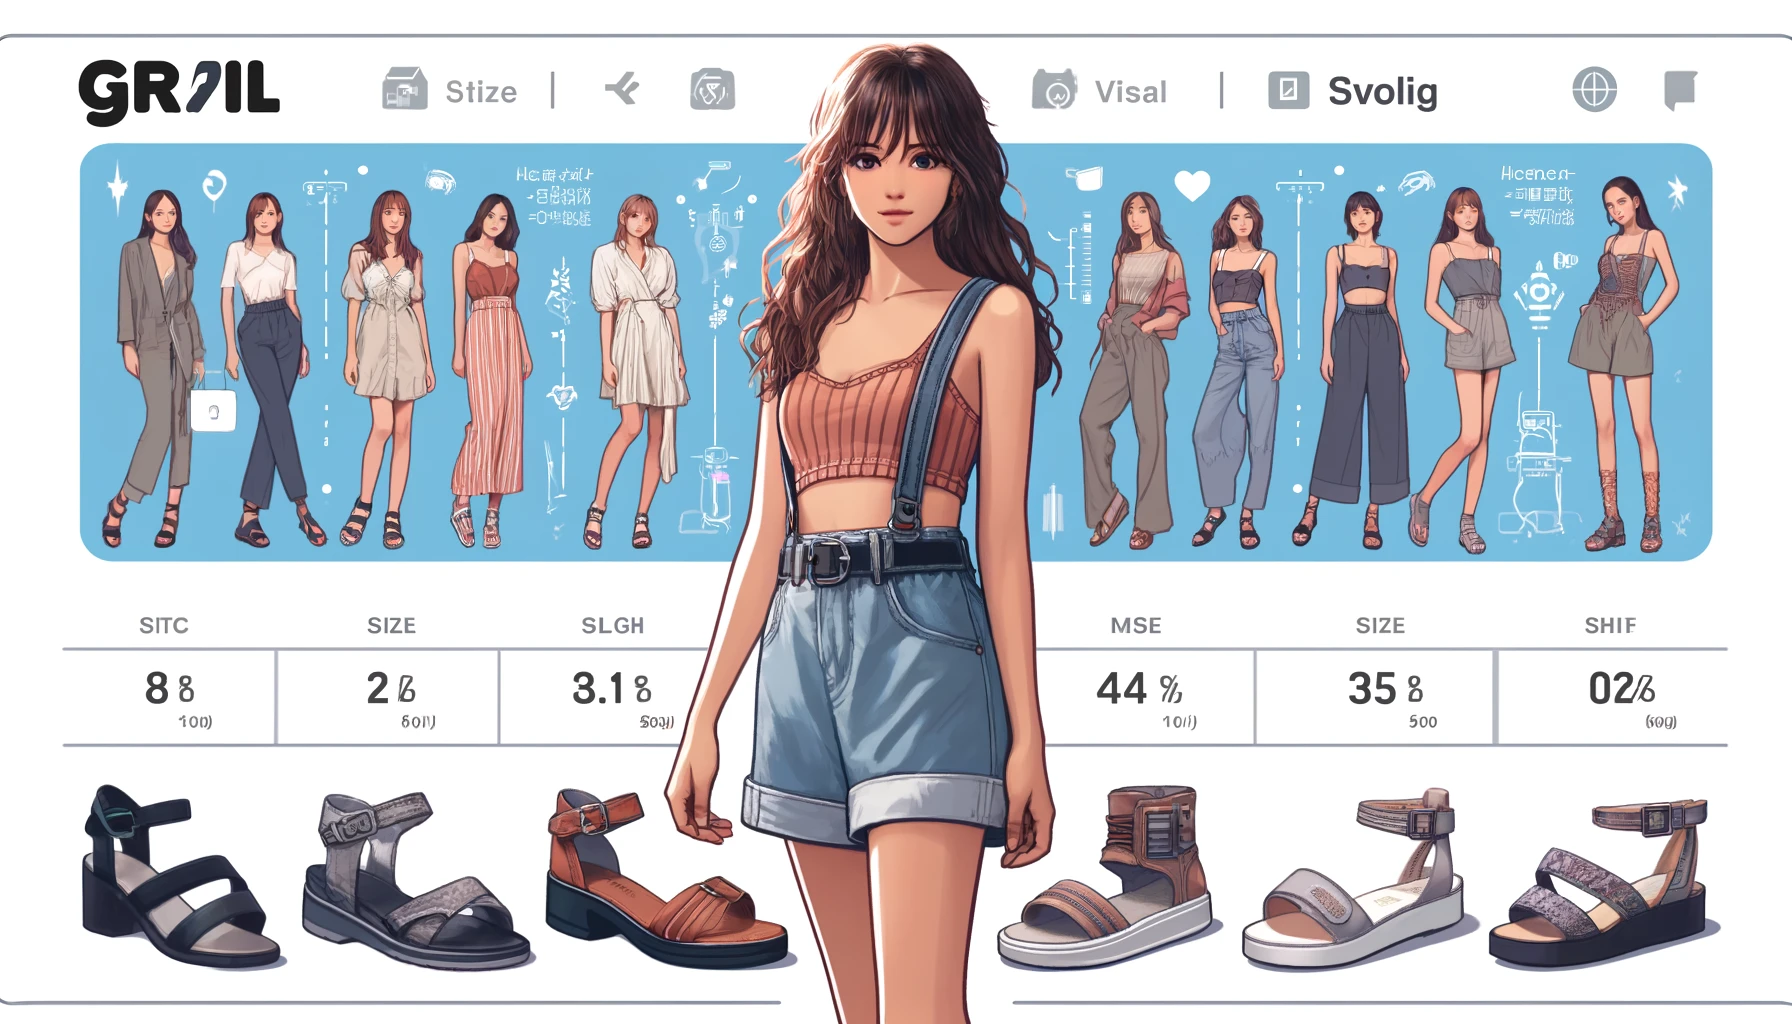 An image showing shoe size options for sandals from GRL (Grail), a budget-friendly women's fashion brand. The image features a stylish Japanese woman wearing different pairs of trendy sandals. There are visual size charts, measurement tips, and guidance on choosing the right shoe size. The background is modern with fashion-related icons.